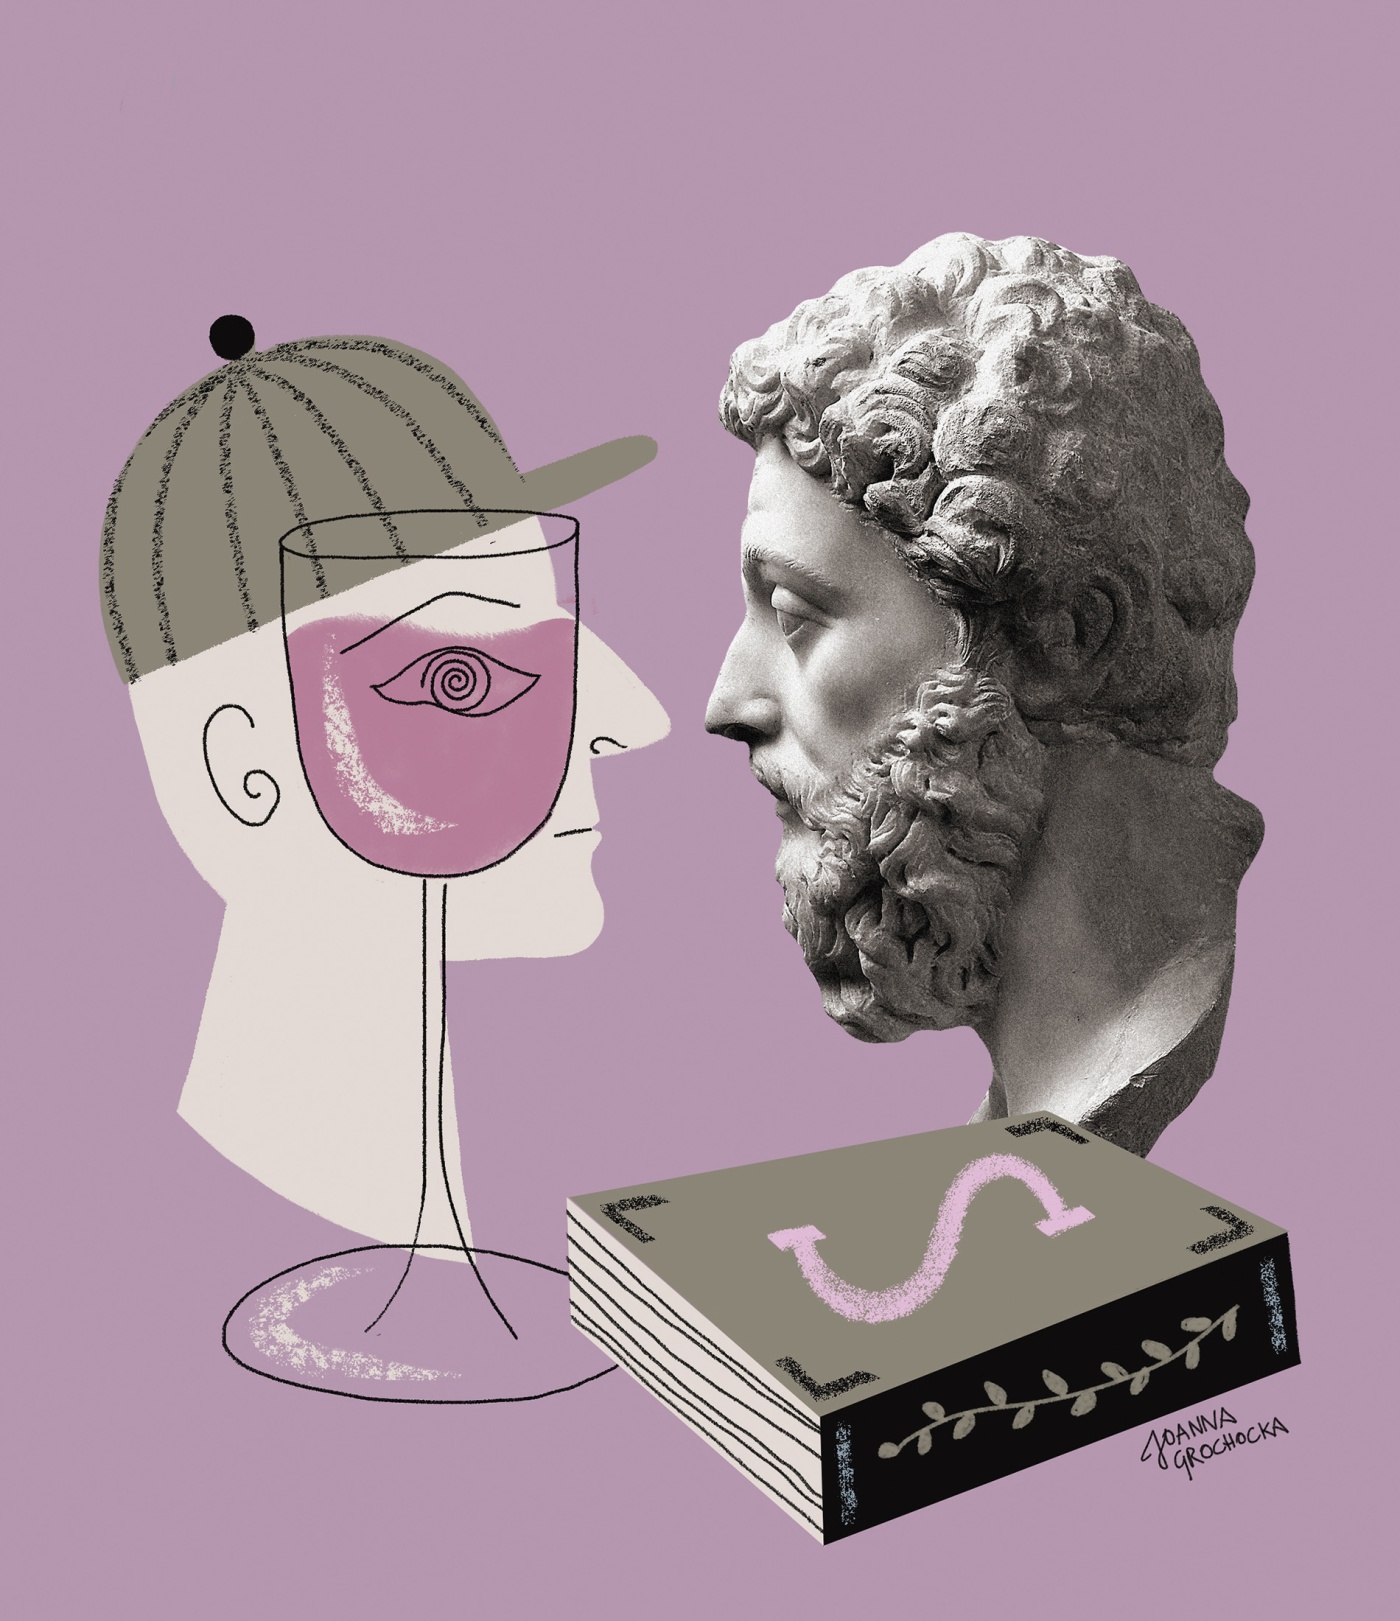 Illustration by Joana Grochocka of a man looking through a wine glass at a greek bust.